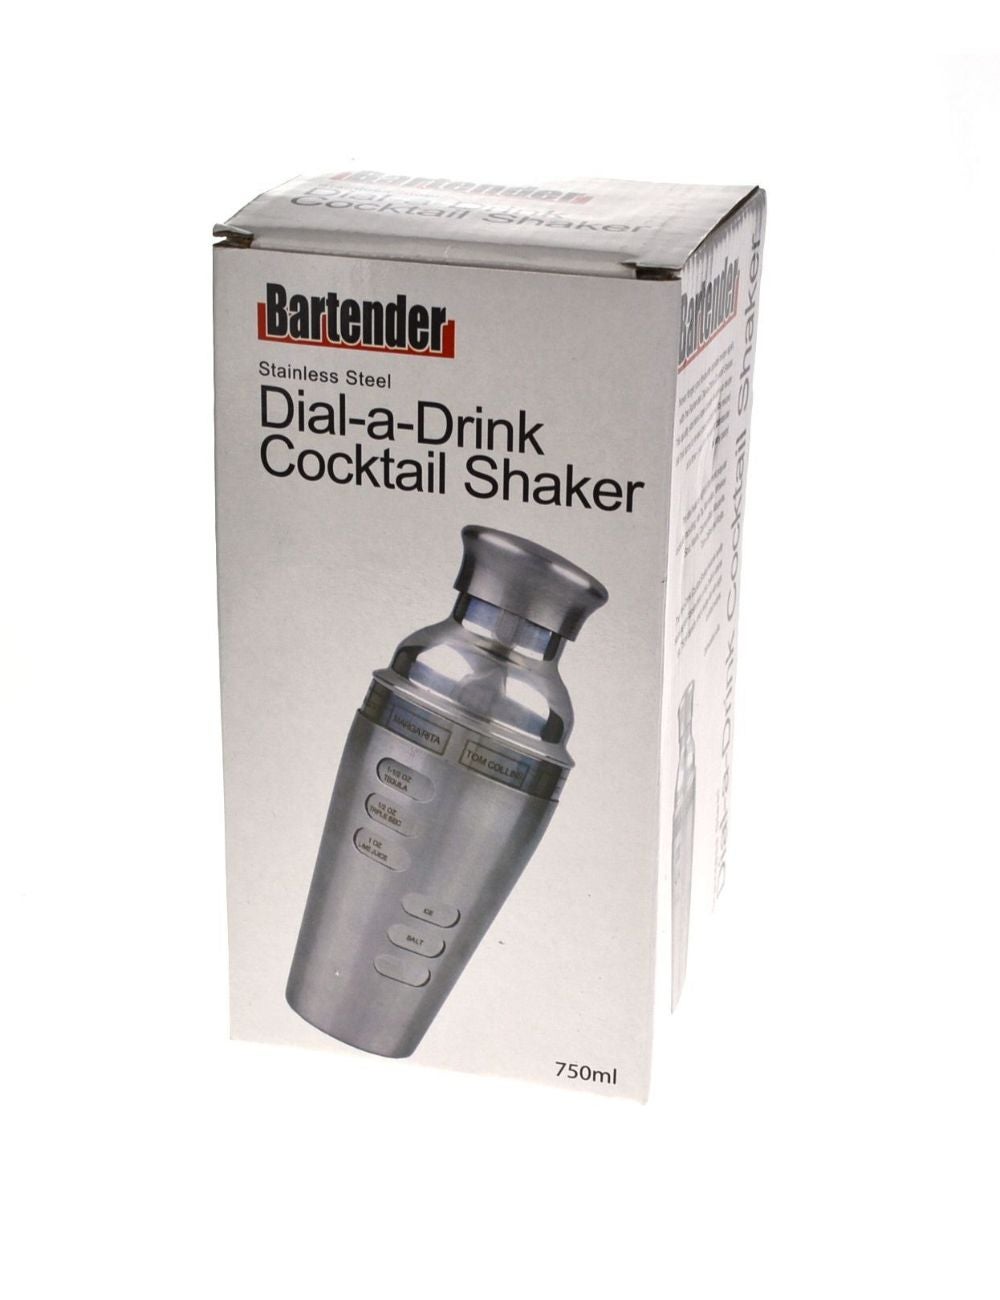 Dial-a-Drink Cocktail Shaker